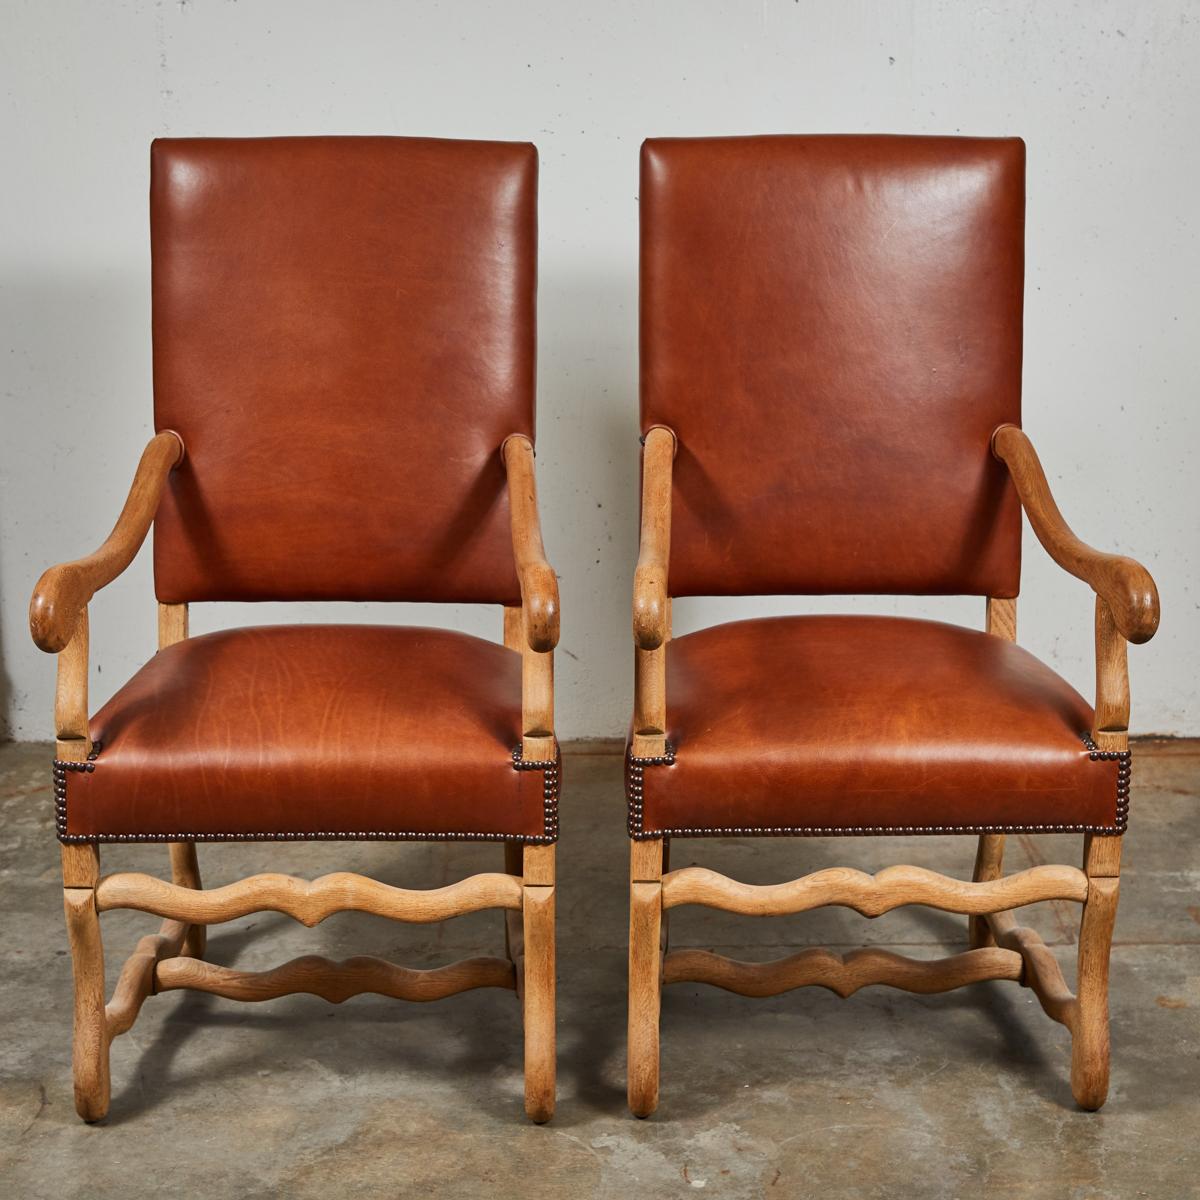 19th Century Pair of Chairs in Bleached Oak and Elm, Upholstered in Leather 2